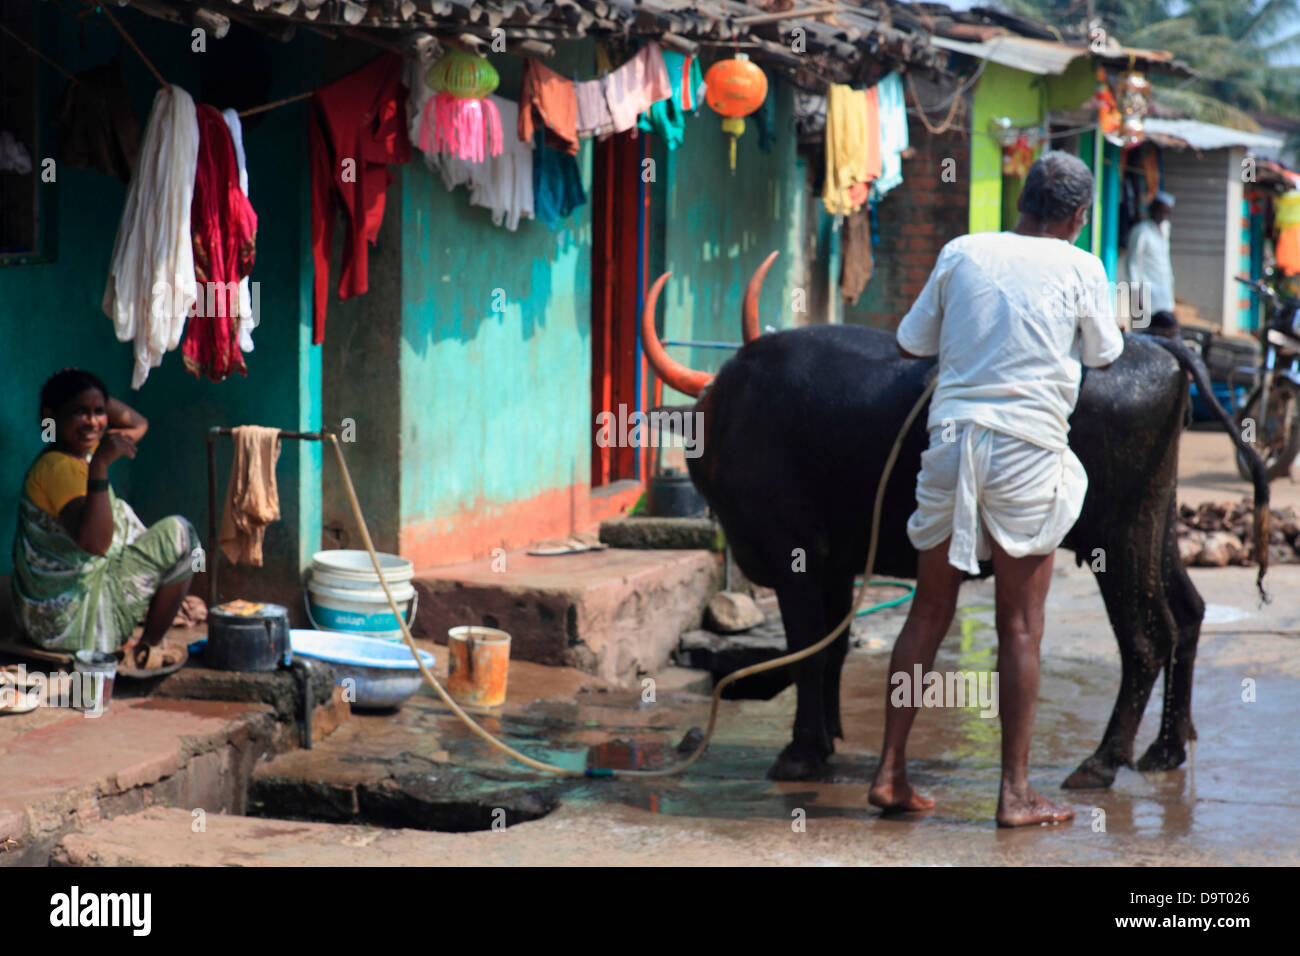 28 Nov.2012 - Belgaum,Karnataka,INDIA A man uses tap water to wash his cattle in the Slum neighbourhood at Belgaum where Veolia runs a Pilot project to supply 24 hours tap water to the houses in the slums. Major Multinational Companies are increasingly targeting the  Bottom Of Pyramid Markets, the poor, in the developing countries like India to drive future growth & Profits. The huge market by way of sheer volume  & size of the poor and lower middle class population has prompted the MNC's to innovate & develop new products to specifically cater to this market. Stock Photo